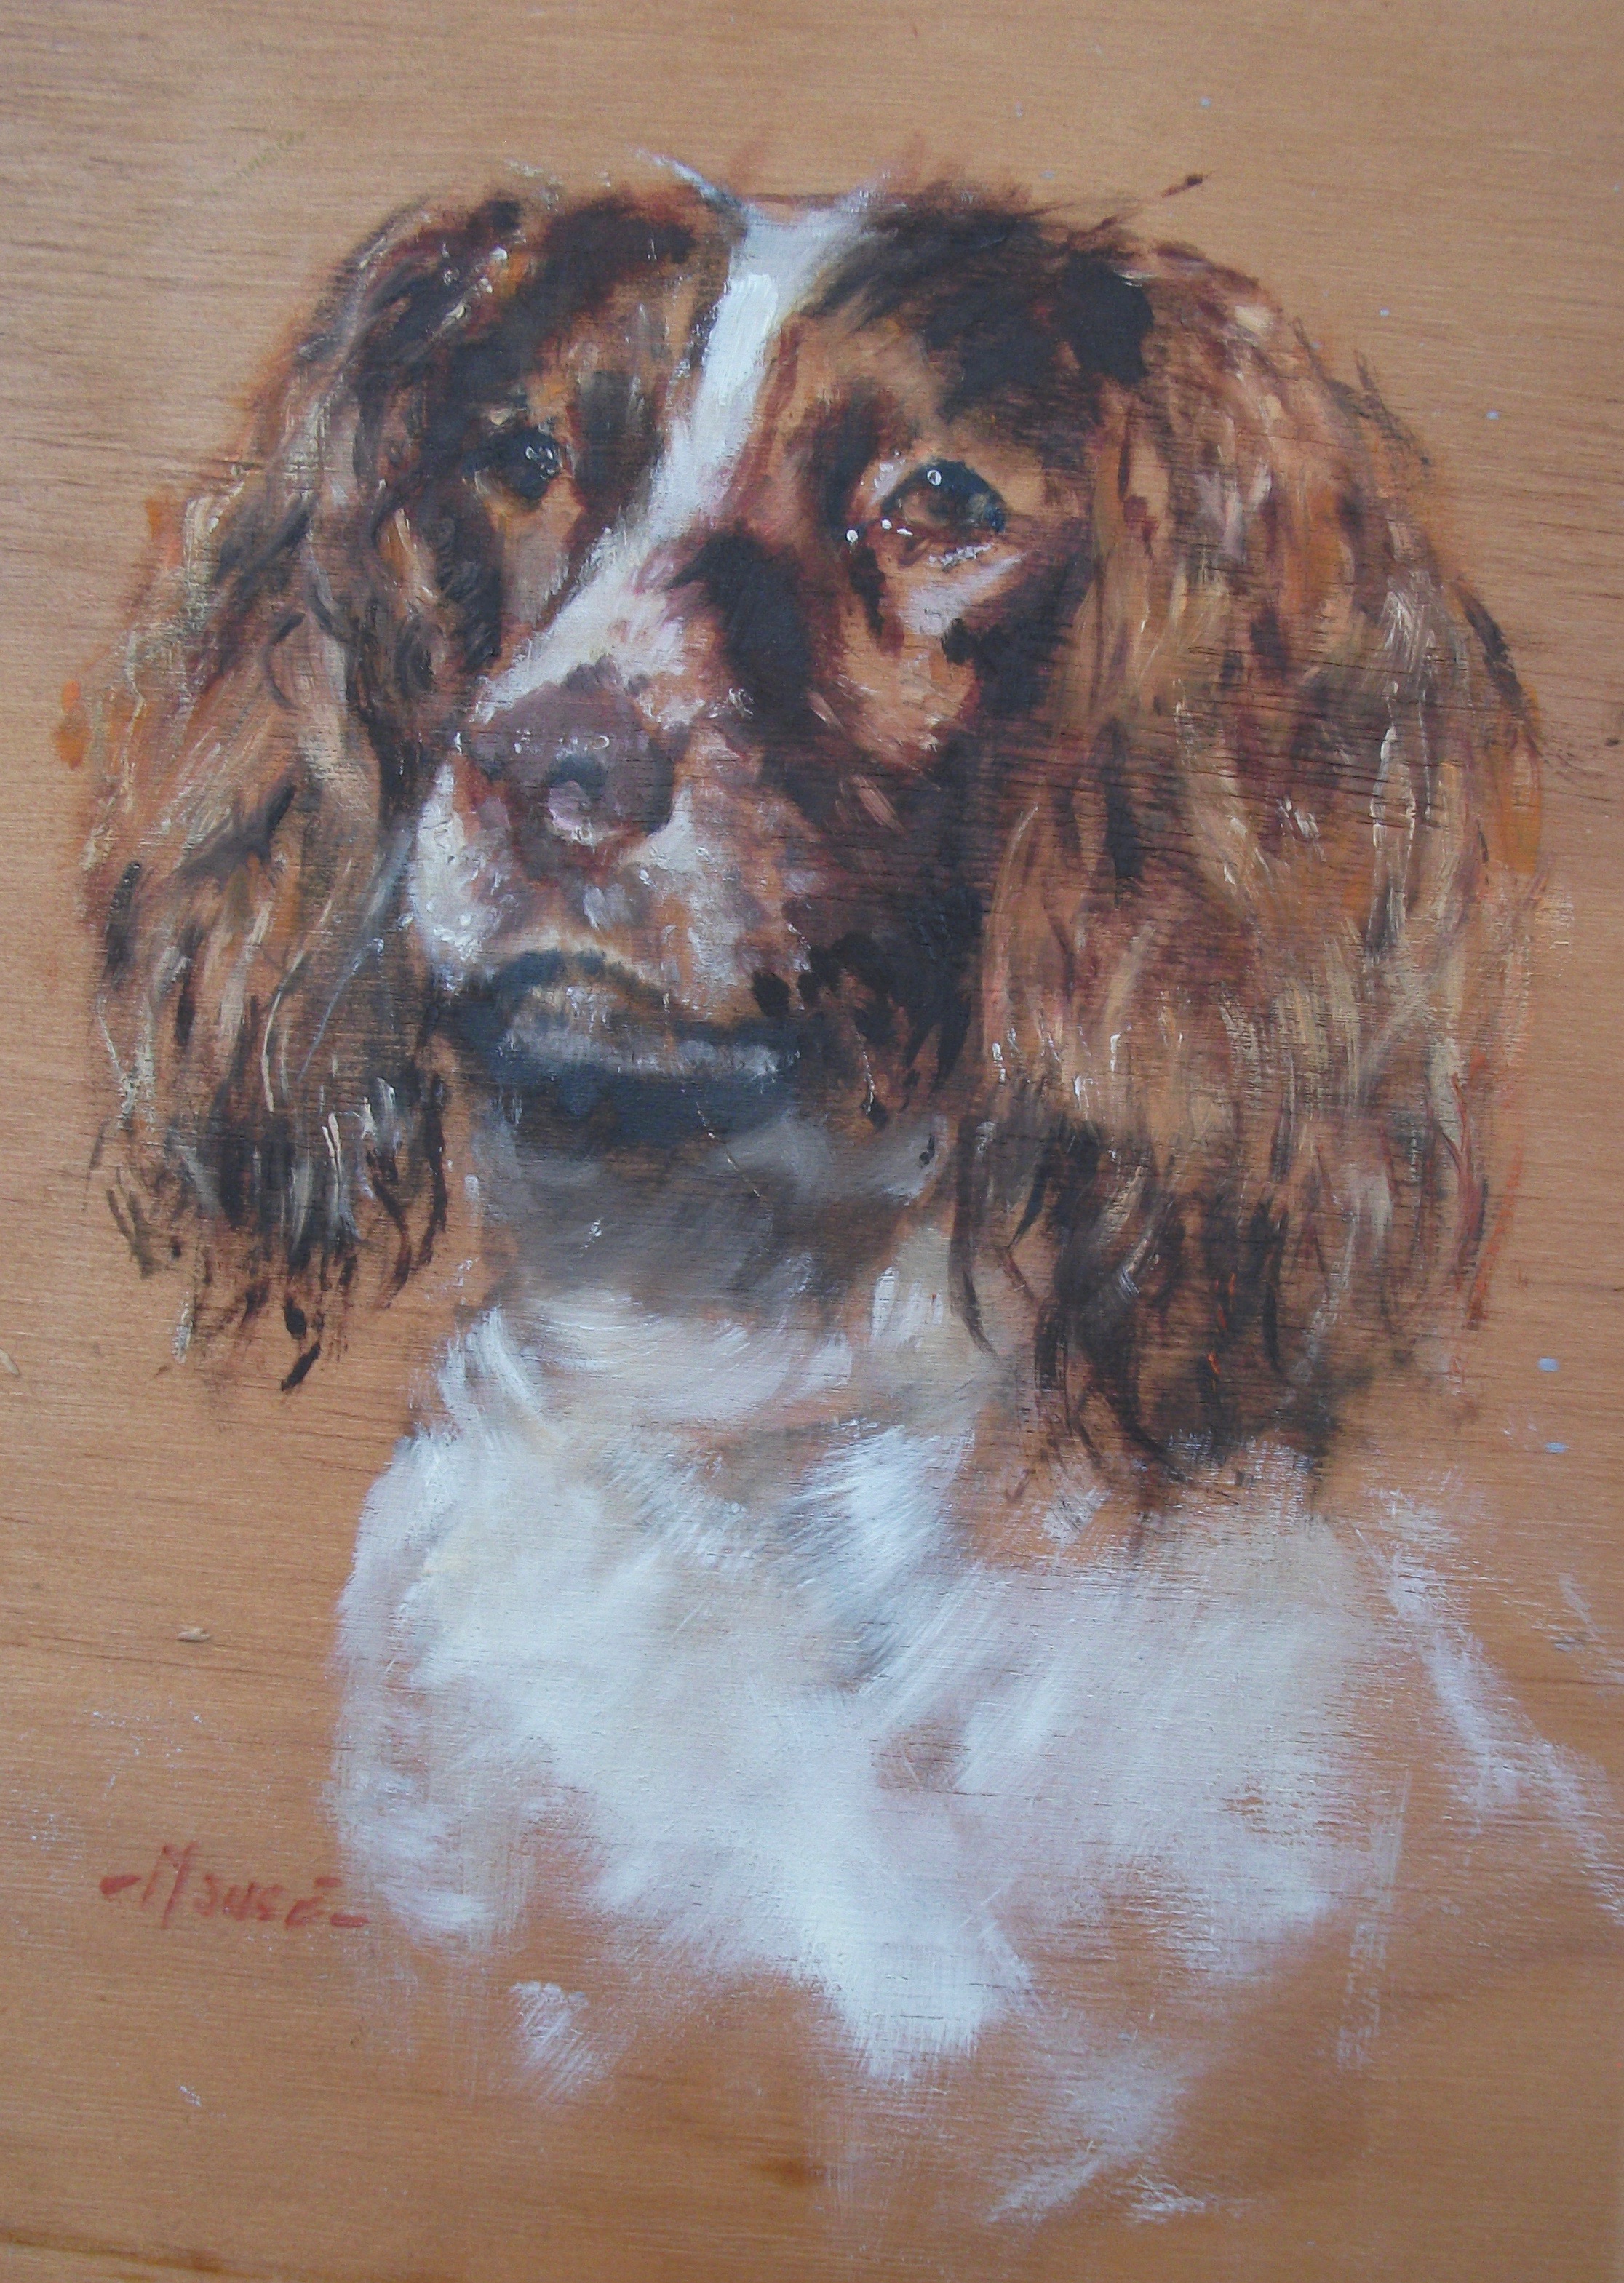 "Head of a Spaniel" by David 'Mouse' Cooper.